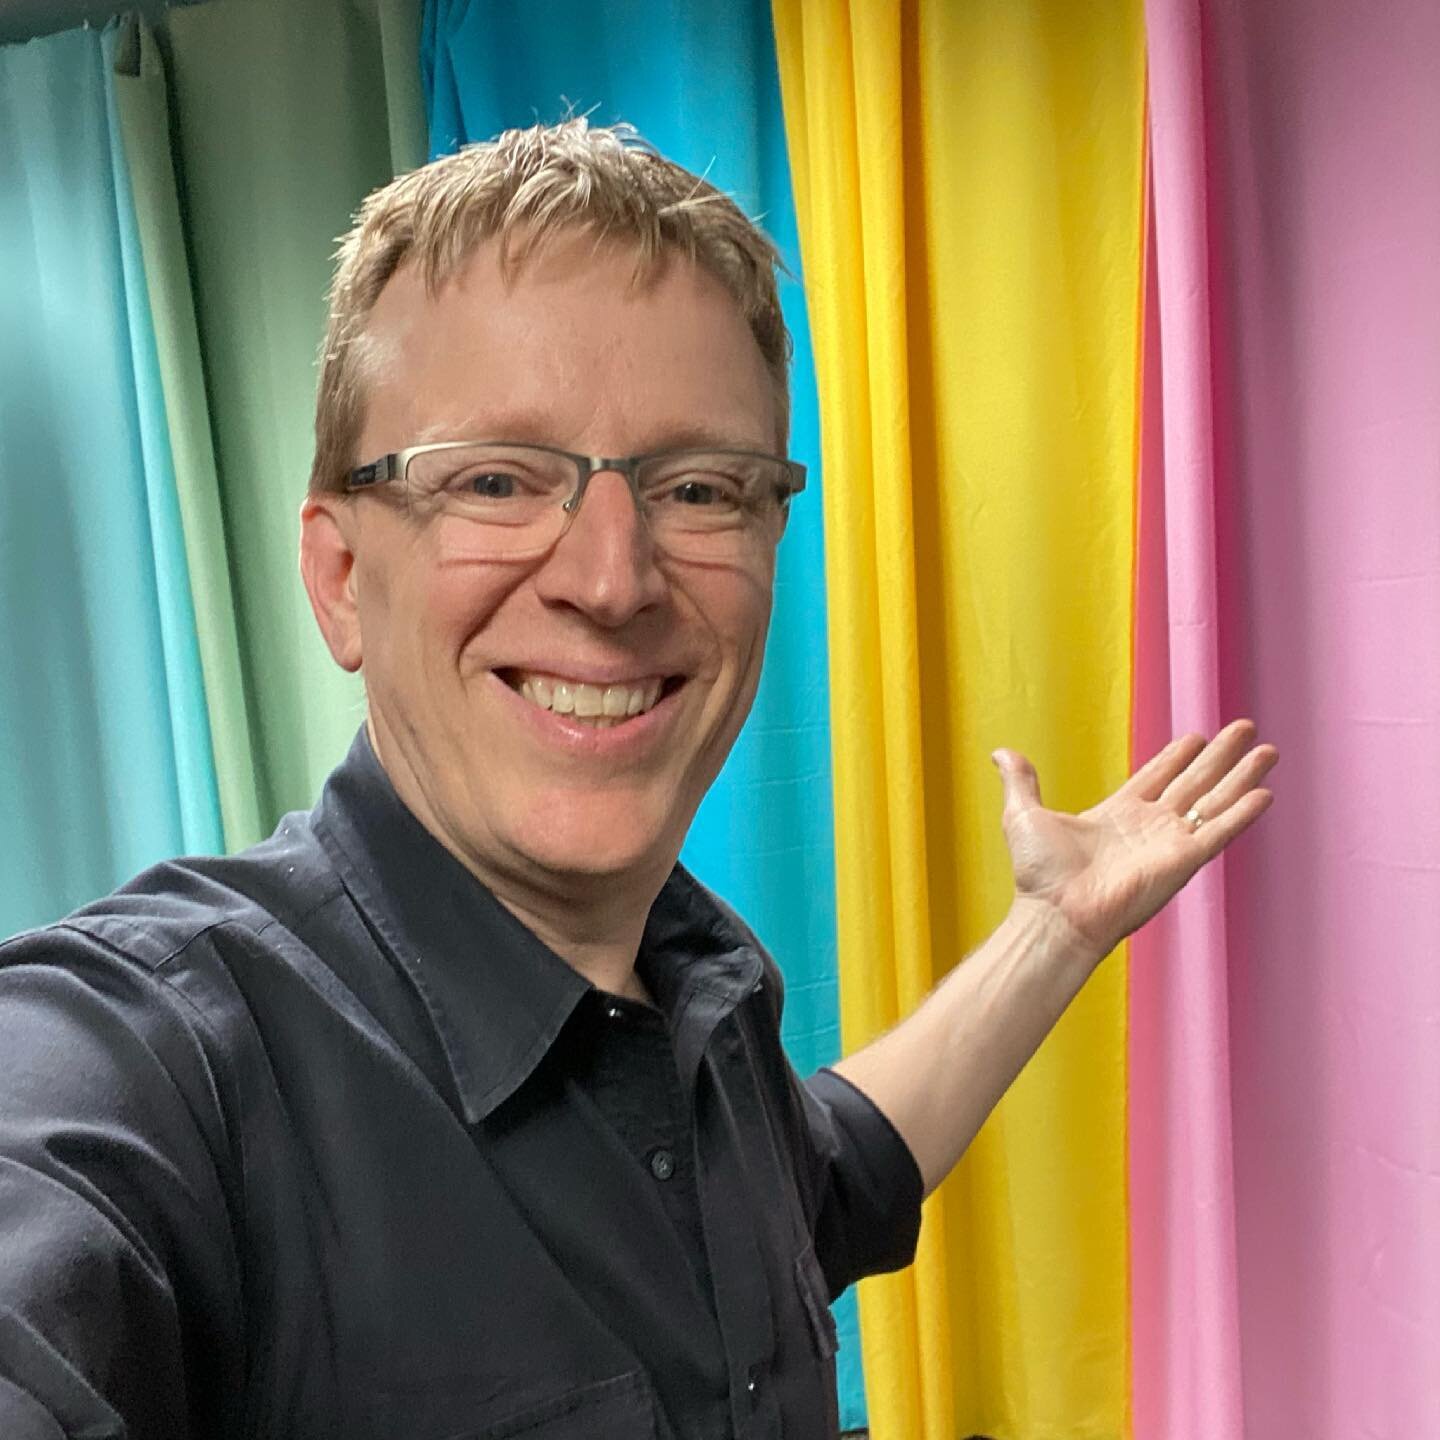 No, I&rsquo;m not coming out! 🤣 just got five new backgrounds hung, (red still on back order - quicker than adding my red gel to lights)

That makes 21 ready-to-shoot backgrounds ready to go in less time than you can change outfits.
#headshots #rain